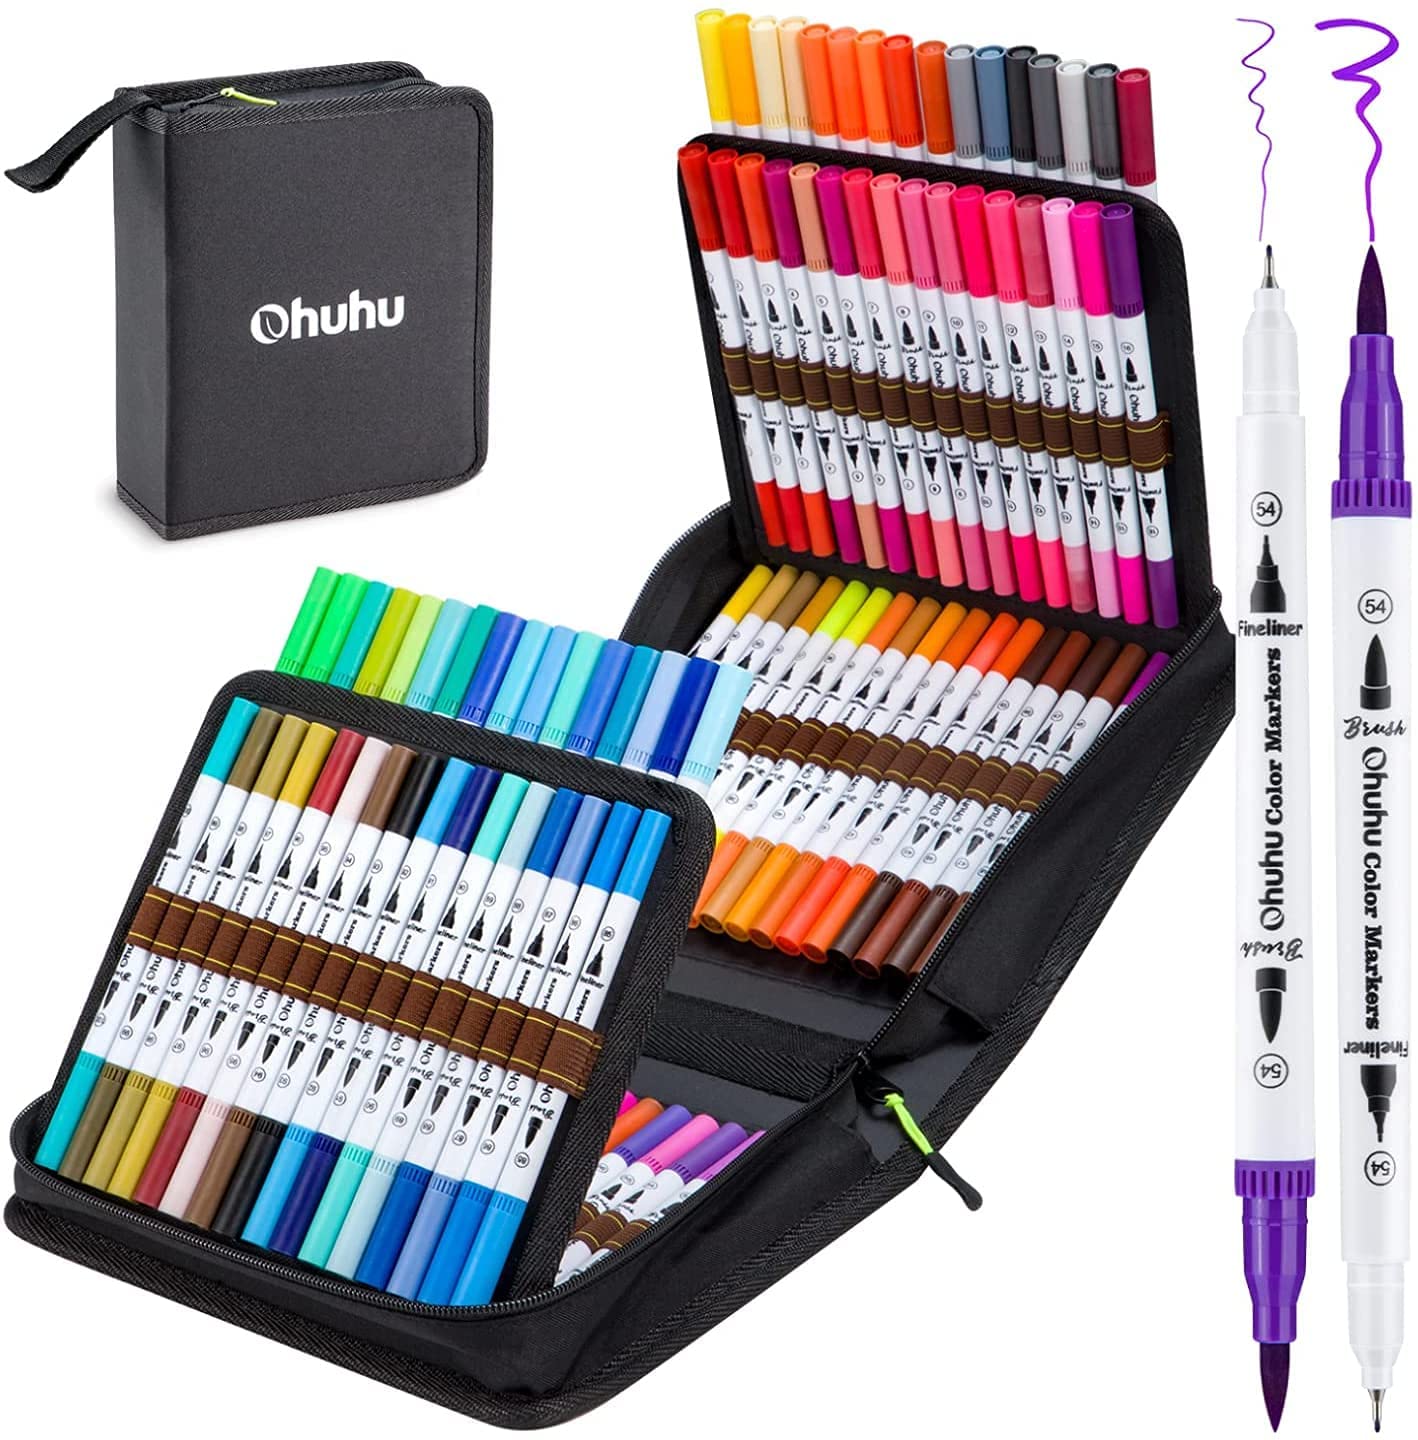  ParKoo 80 Colors Dual Tip Alcohol Markers plus 1 Canvas Tote  Bag, Double Tipped Fine & Chisel Alcohol-based Art Marker Set with Swatch  Chart & Carrying Case for Kids, Adult